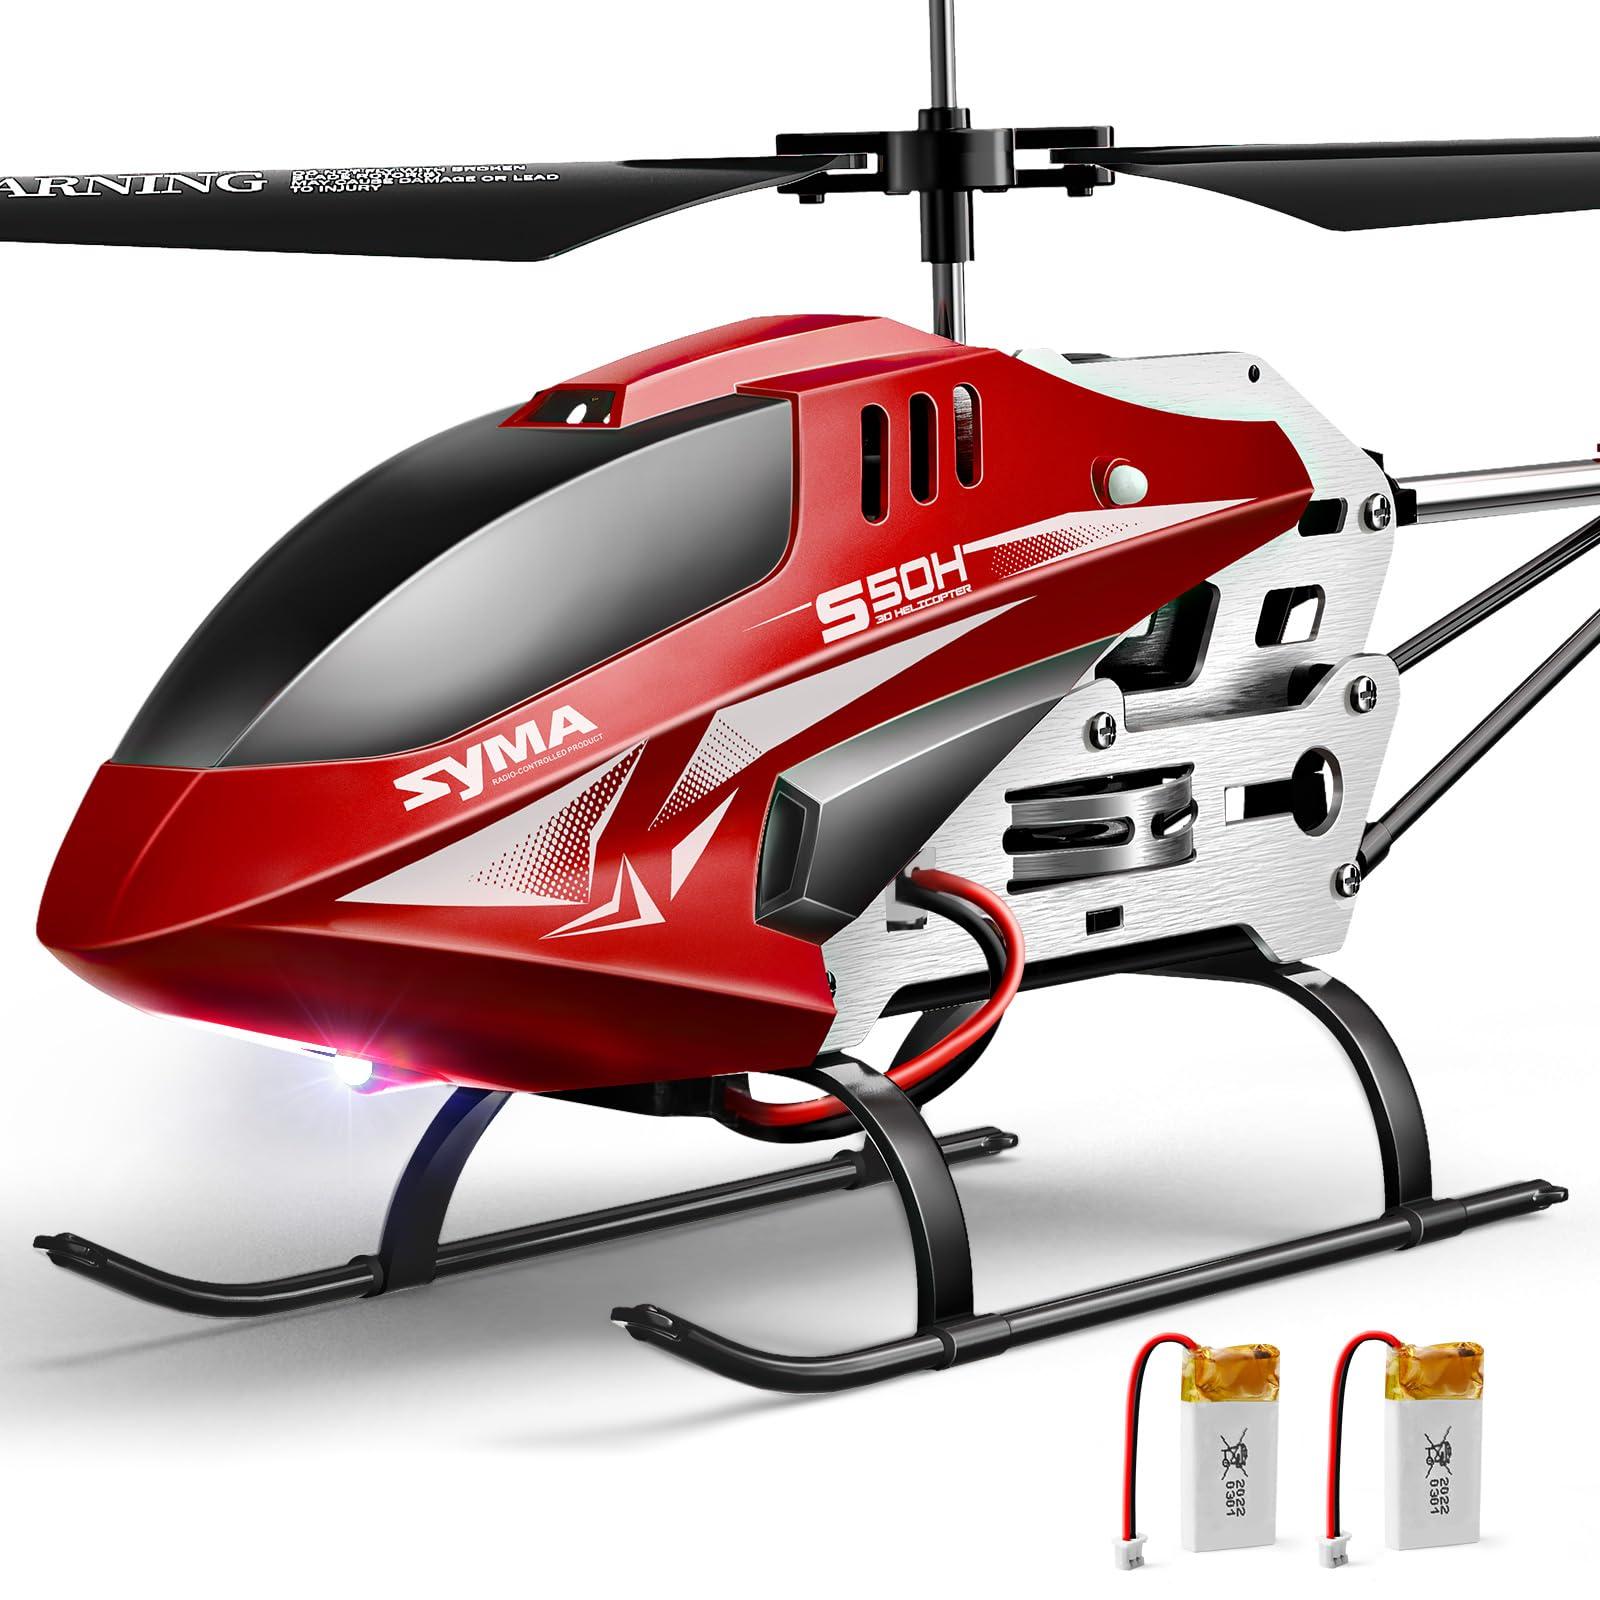 Electric Rc Helicopter: Endless Possibilities with Electric RC Helicopters. 